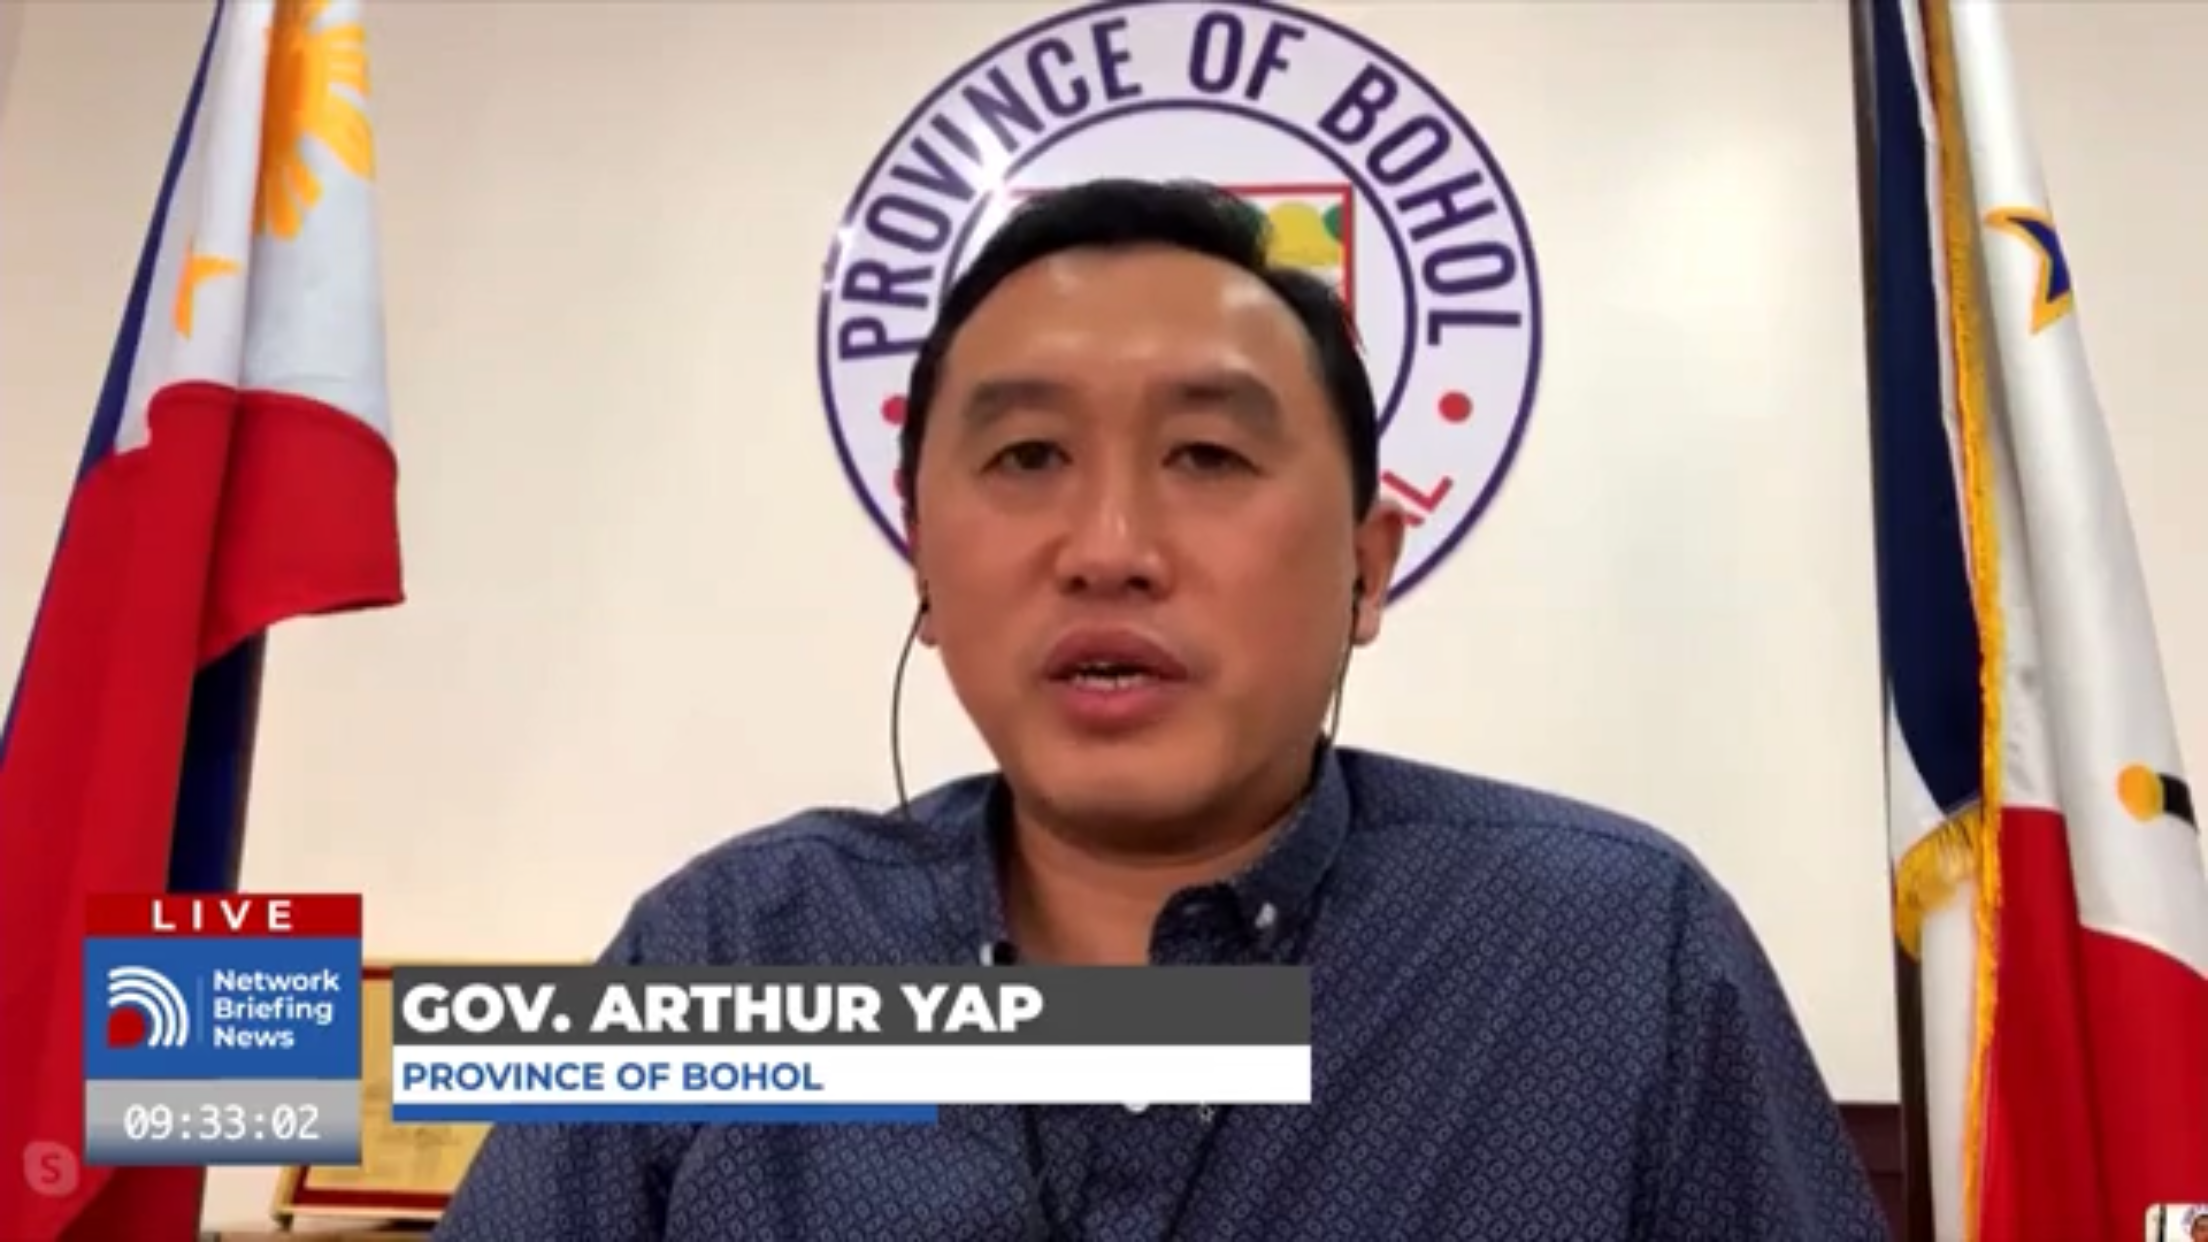 Yap on opening of Bohol to tourists: Let’s not rush it